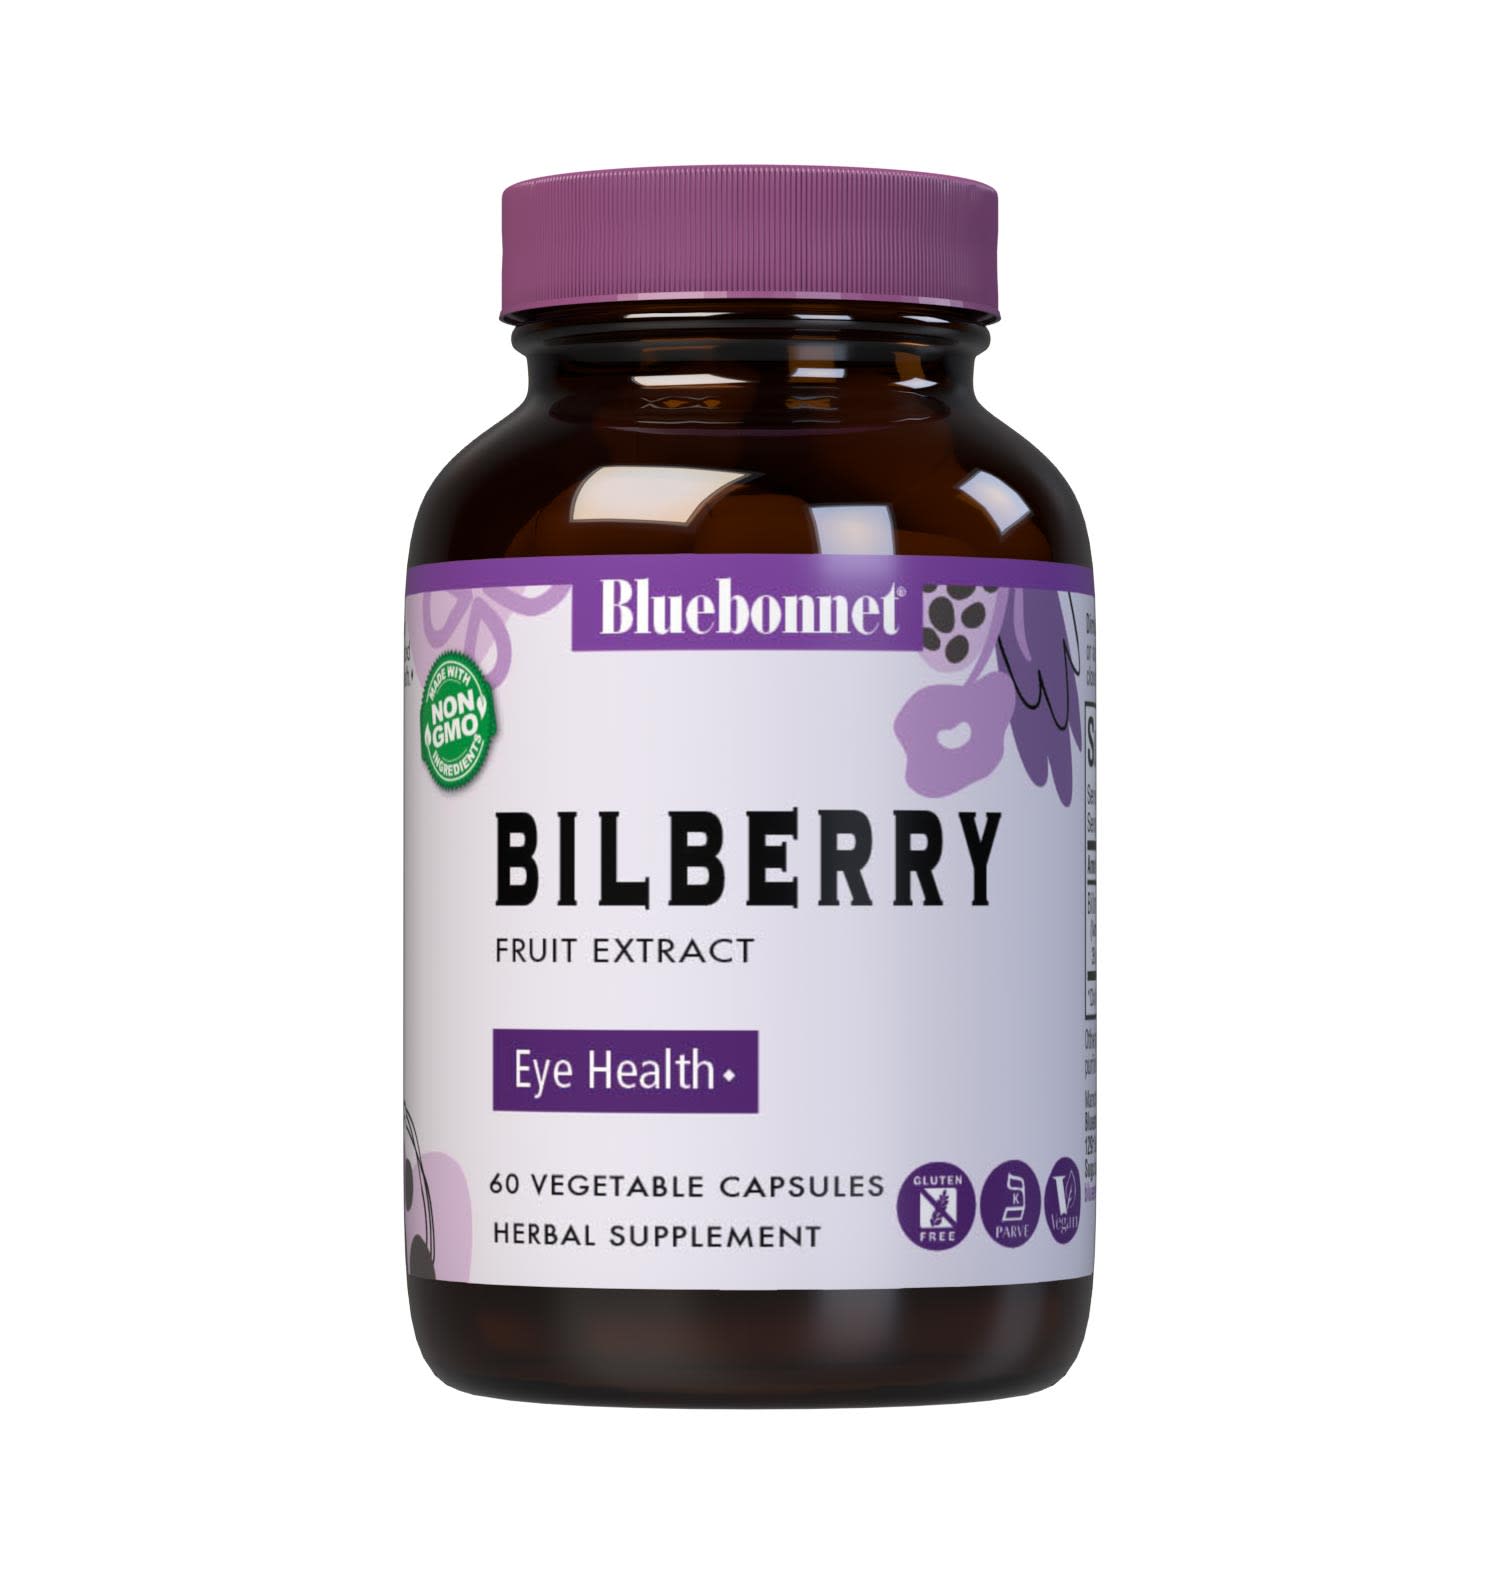 Bluebonnet’s Bilberry Fruit Extract 60 Vegetable Capsules contain Mirtoselect from Indena, a standardized extract of anthocyanins, the most researched active constituents found in bilberry fruit. A clean and gentle water-based extraction method is employed to capture and preserve bilberry’s most valuable components. #size_60 count